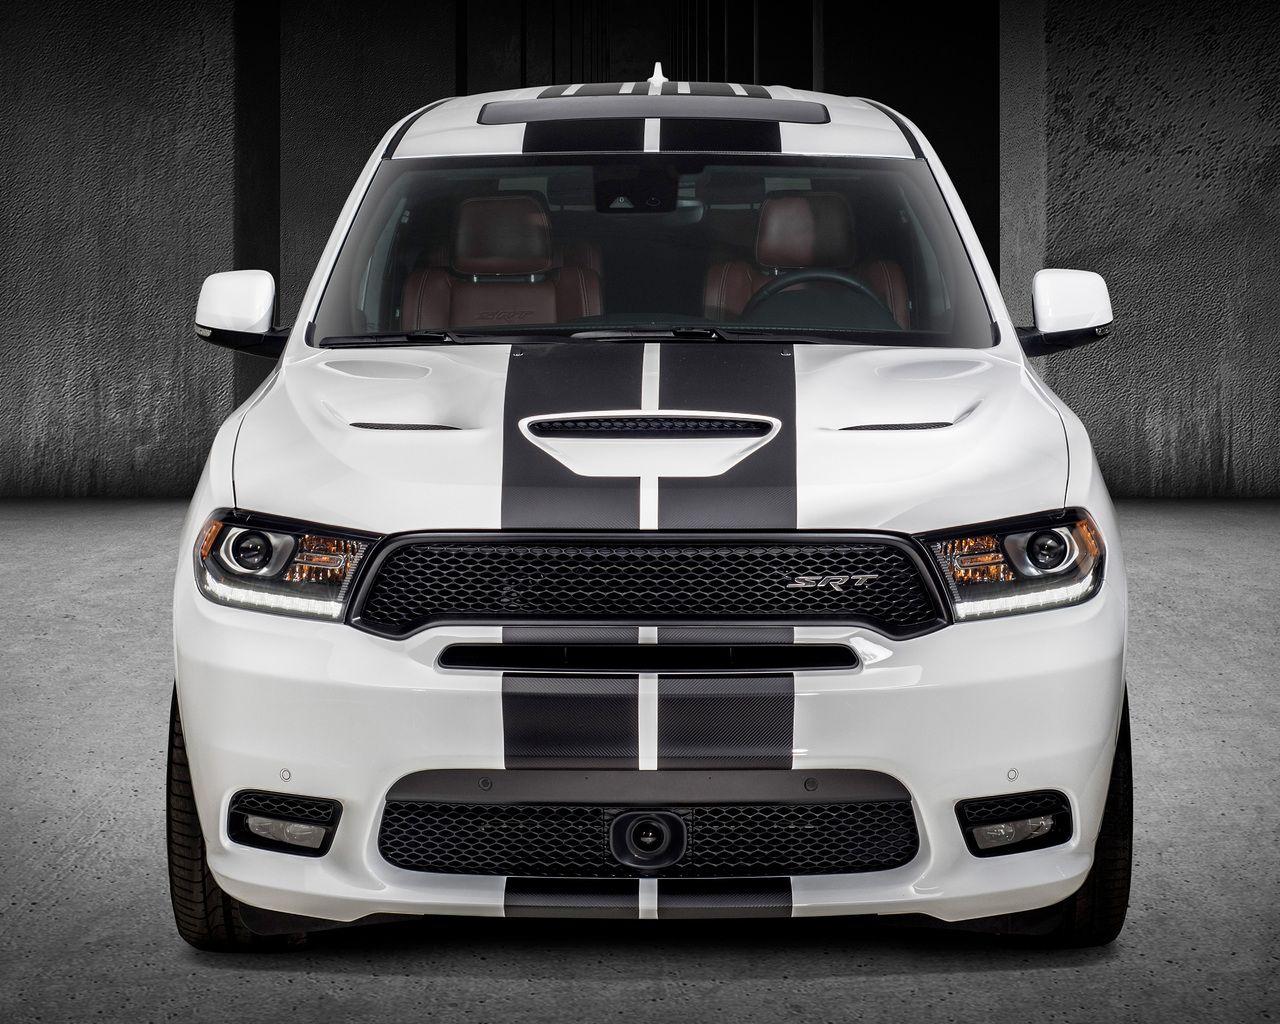 1080x1920  1080x1920 dodge charger dodge durango dodge cars hd for  Iphone 6 7 8 wallpaper  Coolwallpapersme